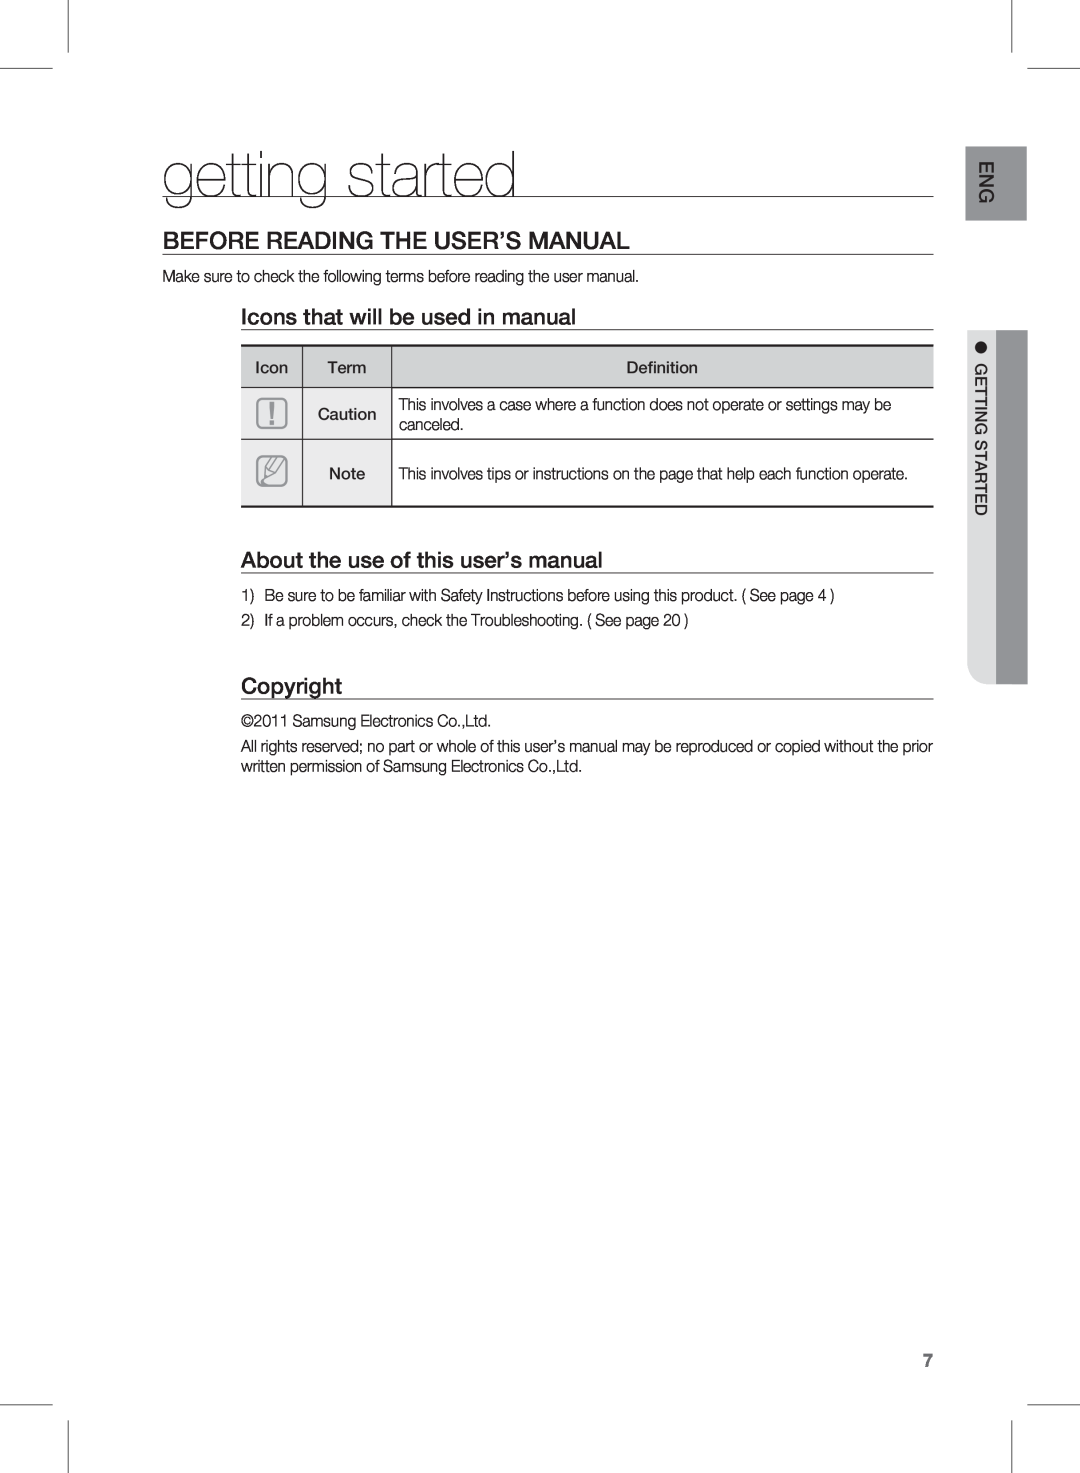 Samsung HW-D451, HW-D450 user manual getting started, Icons that will be used in manual, Copyright 